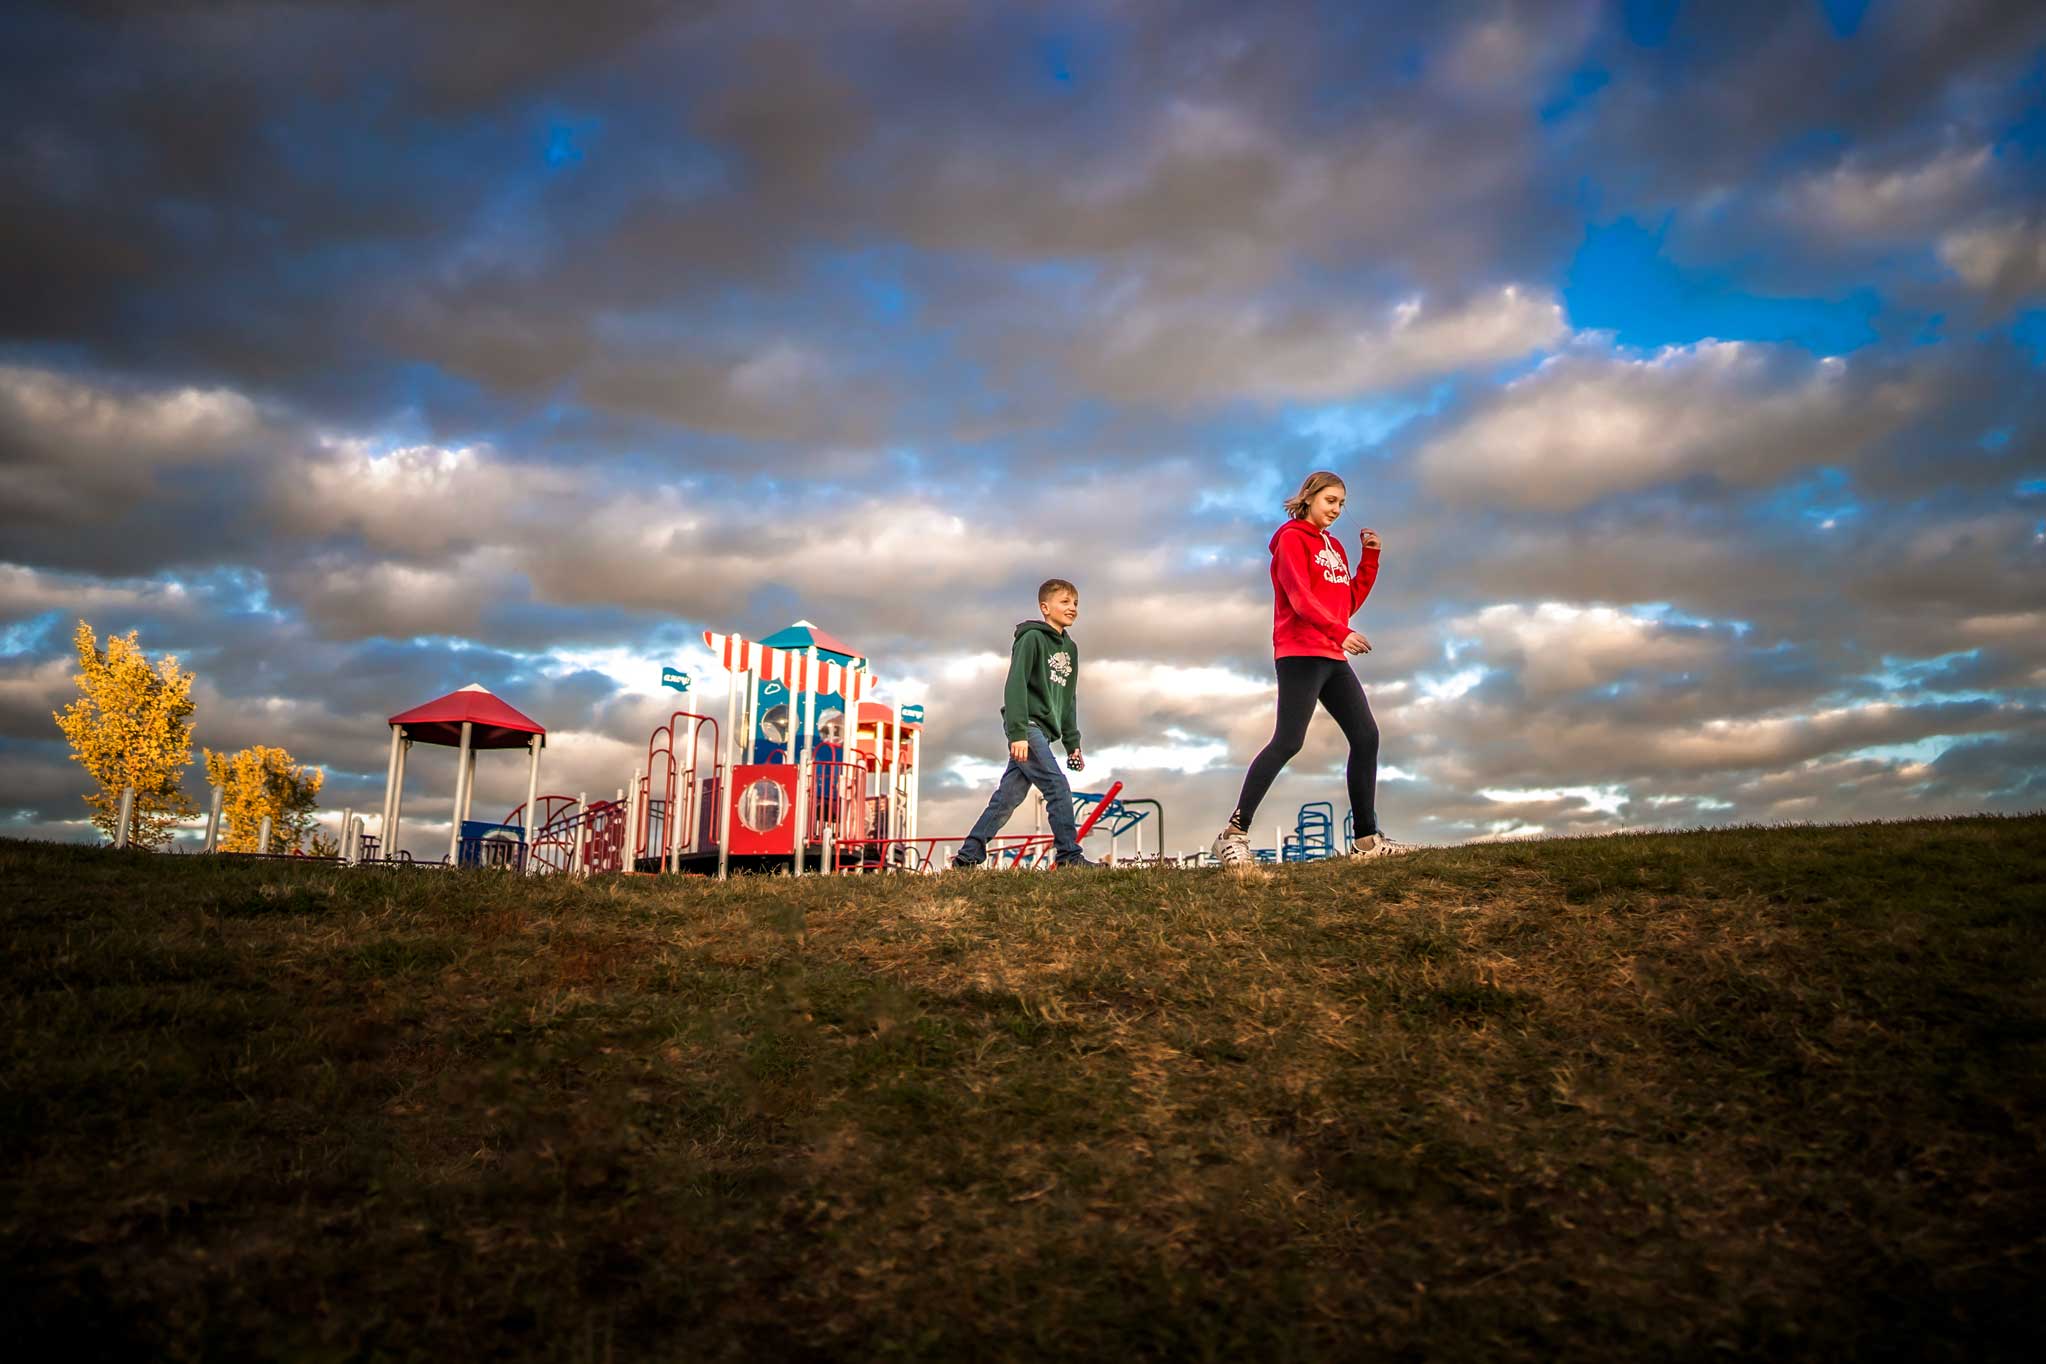 Children at a playground with big sky